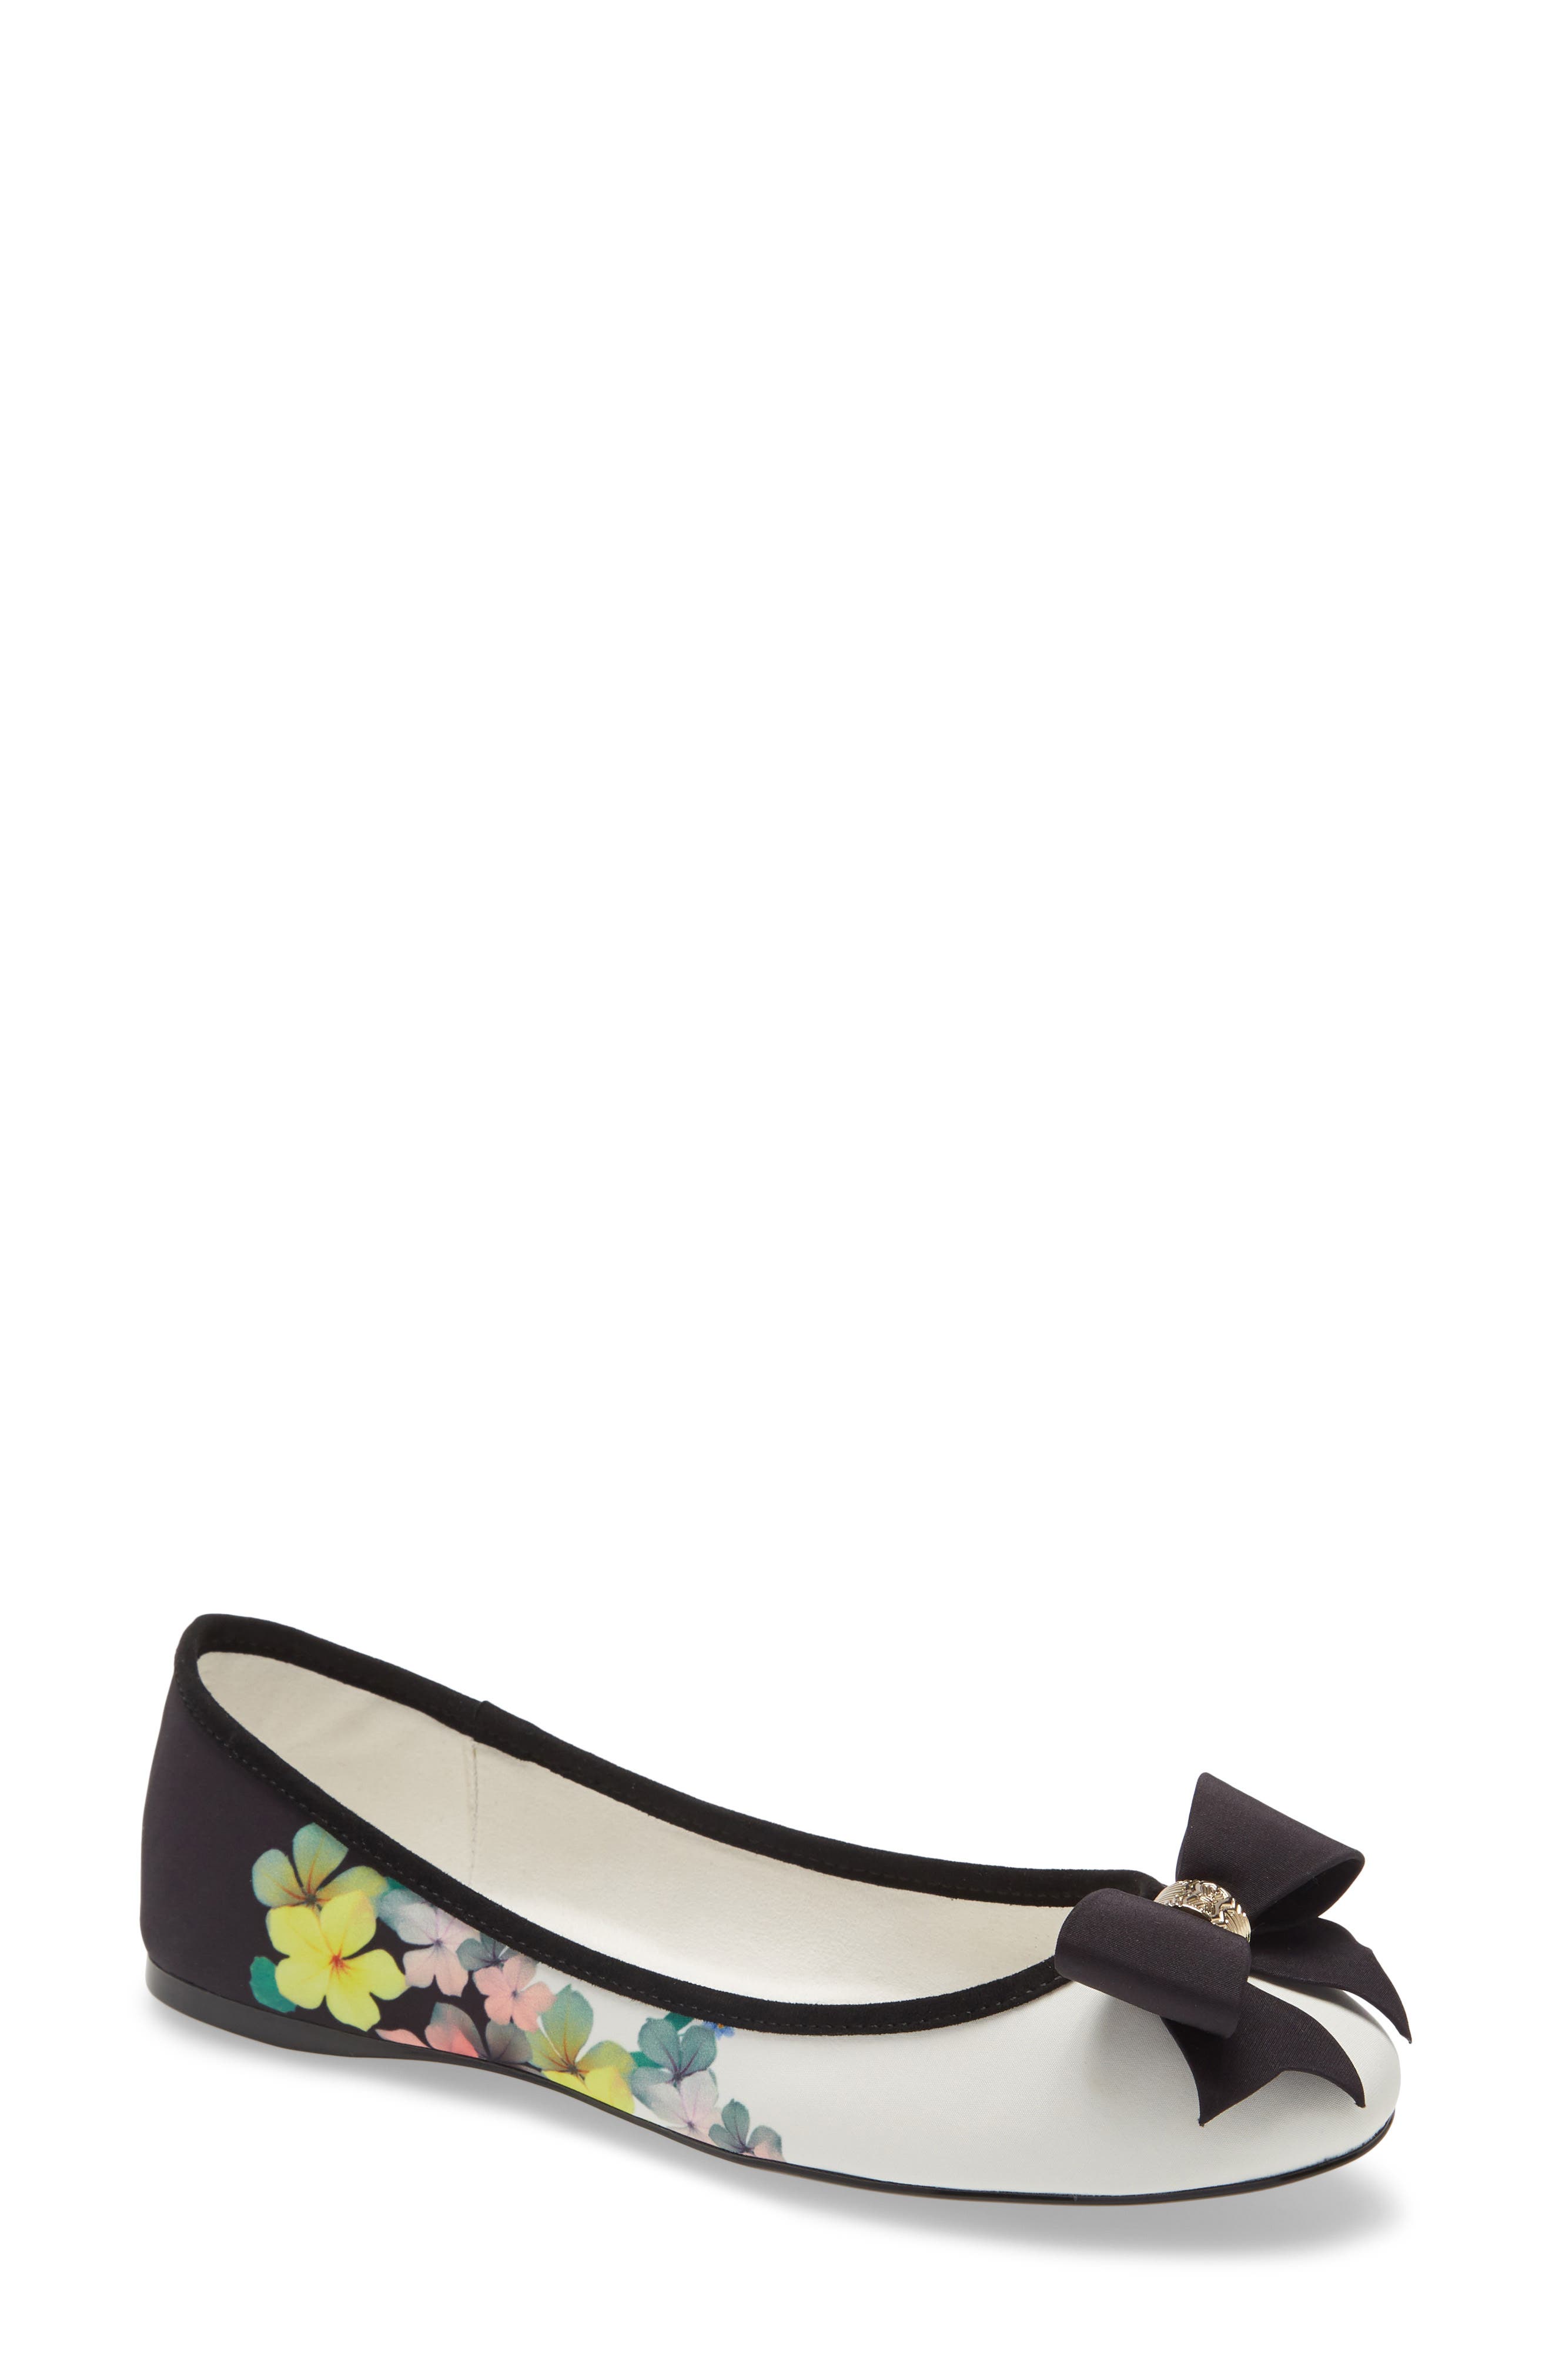 ted baker flat shoes sale